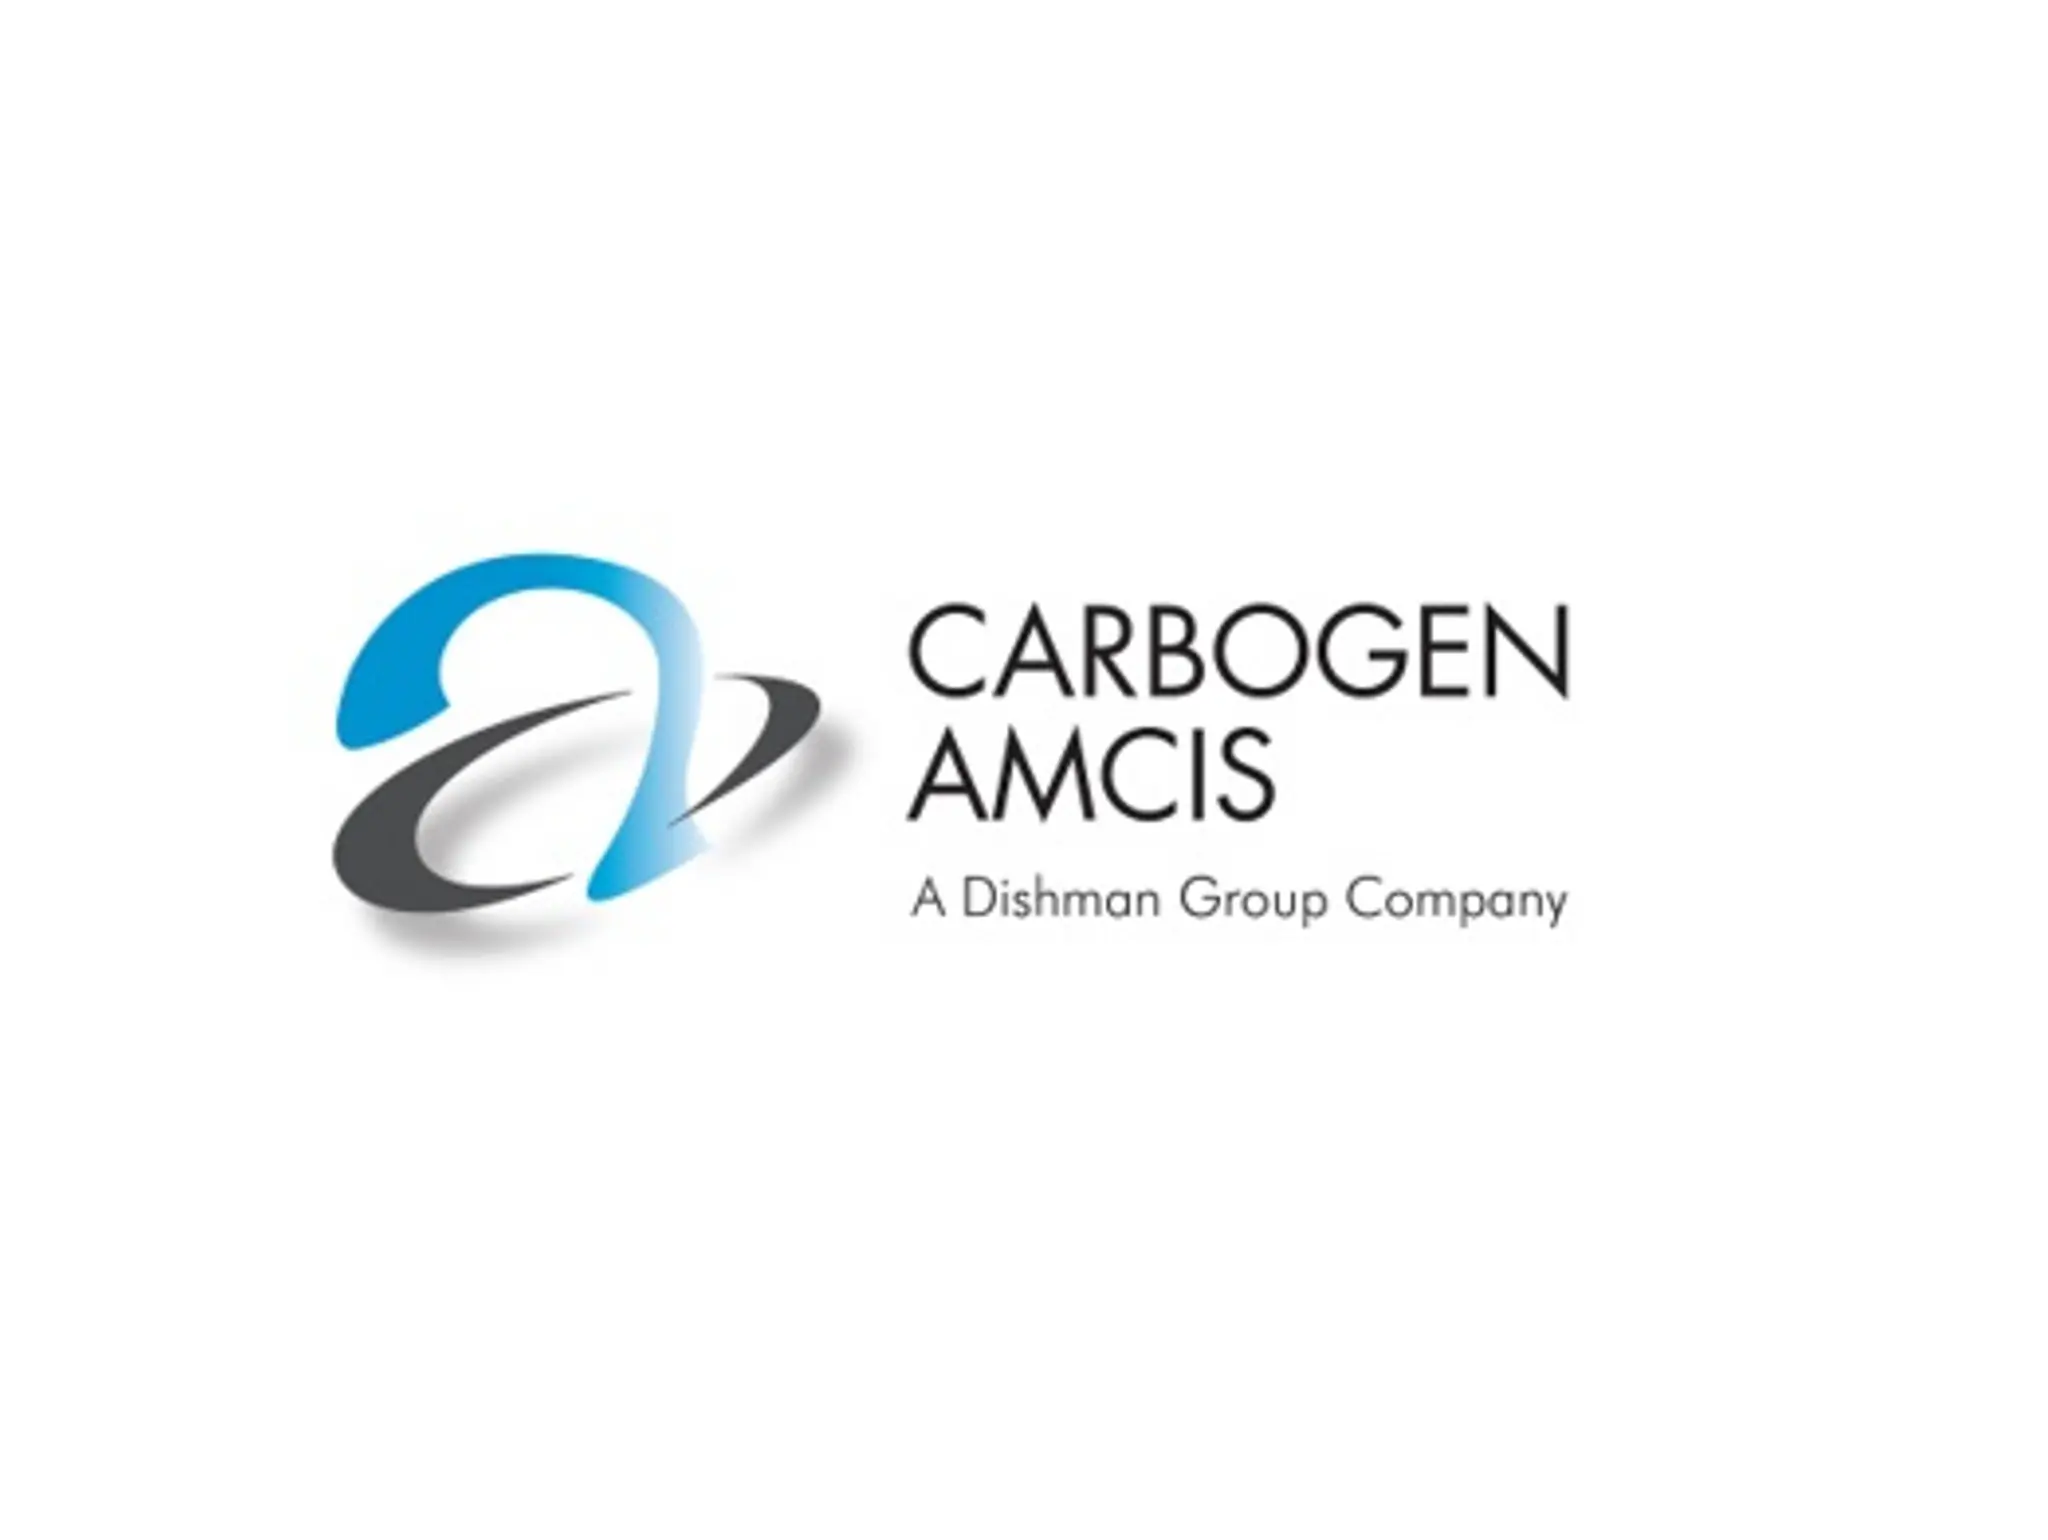  CARBOGEN AMCIS announces successful ANVISA audit of its facility in China